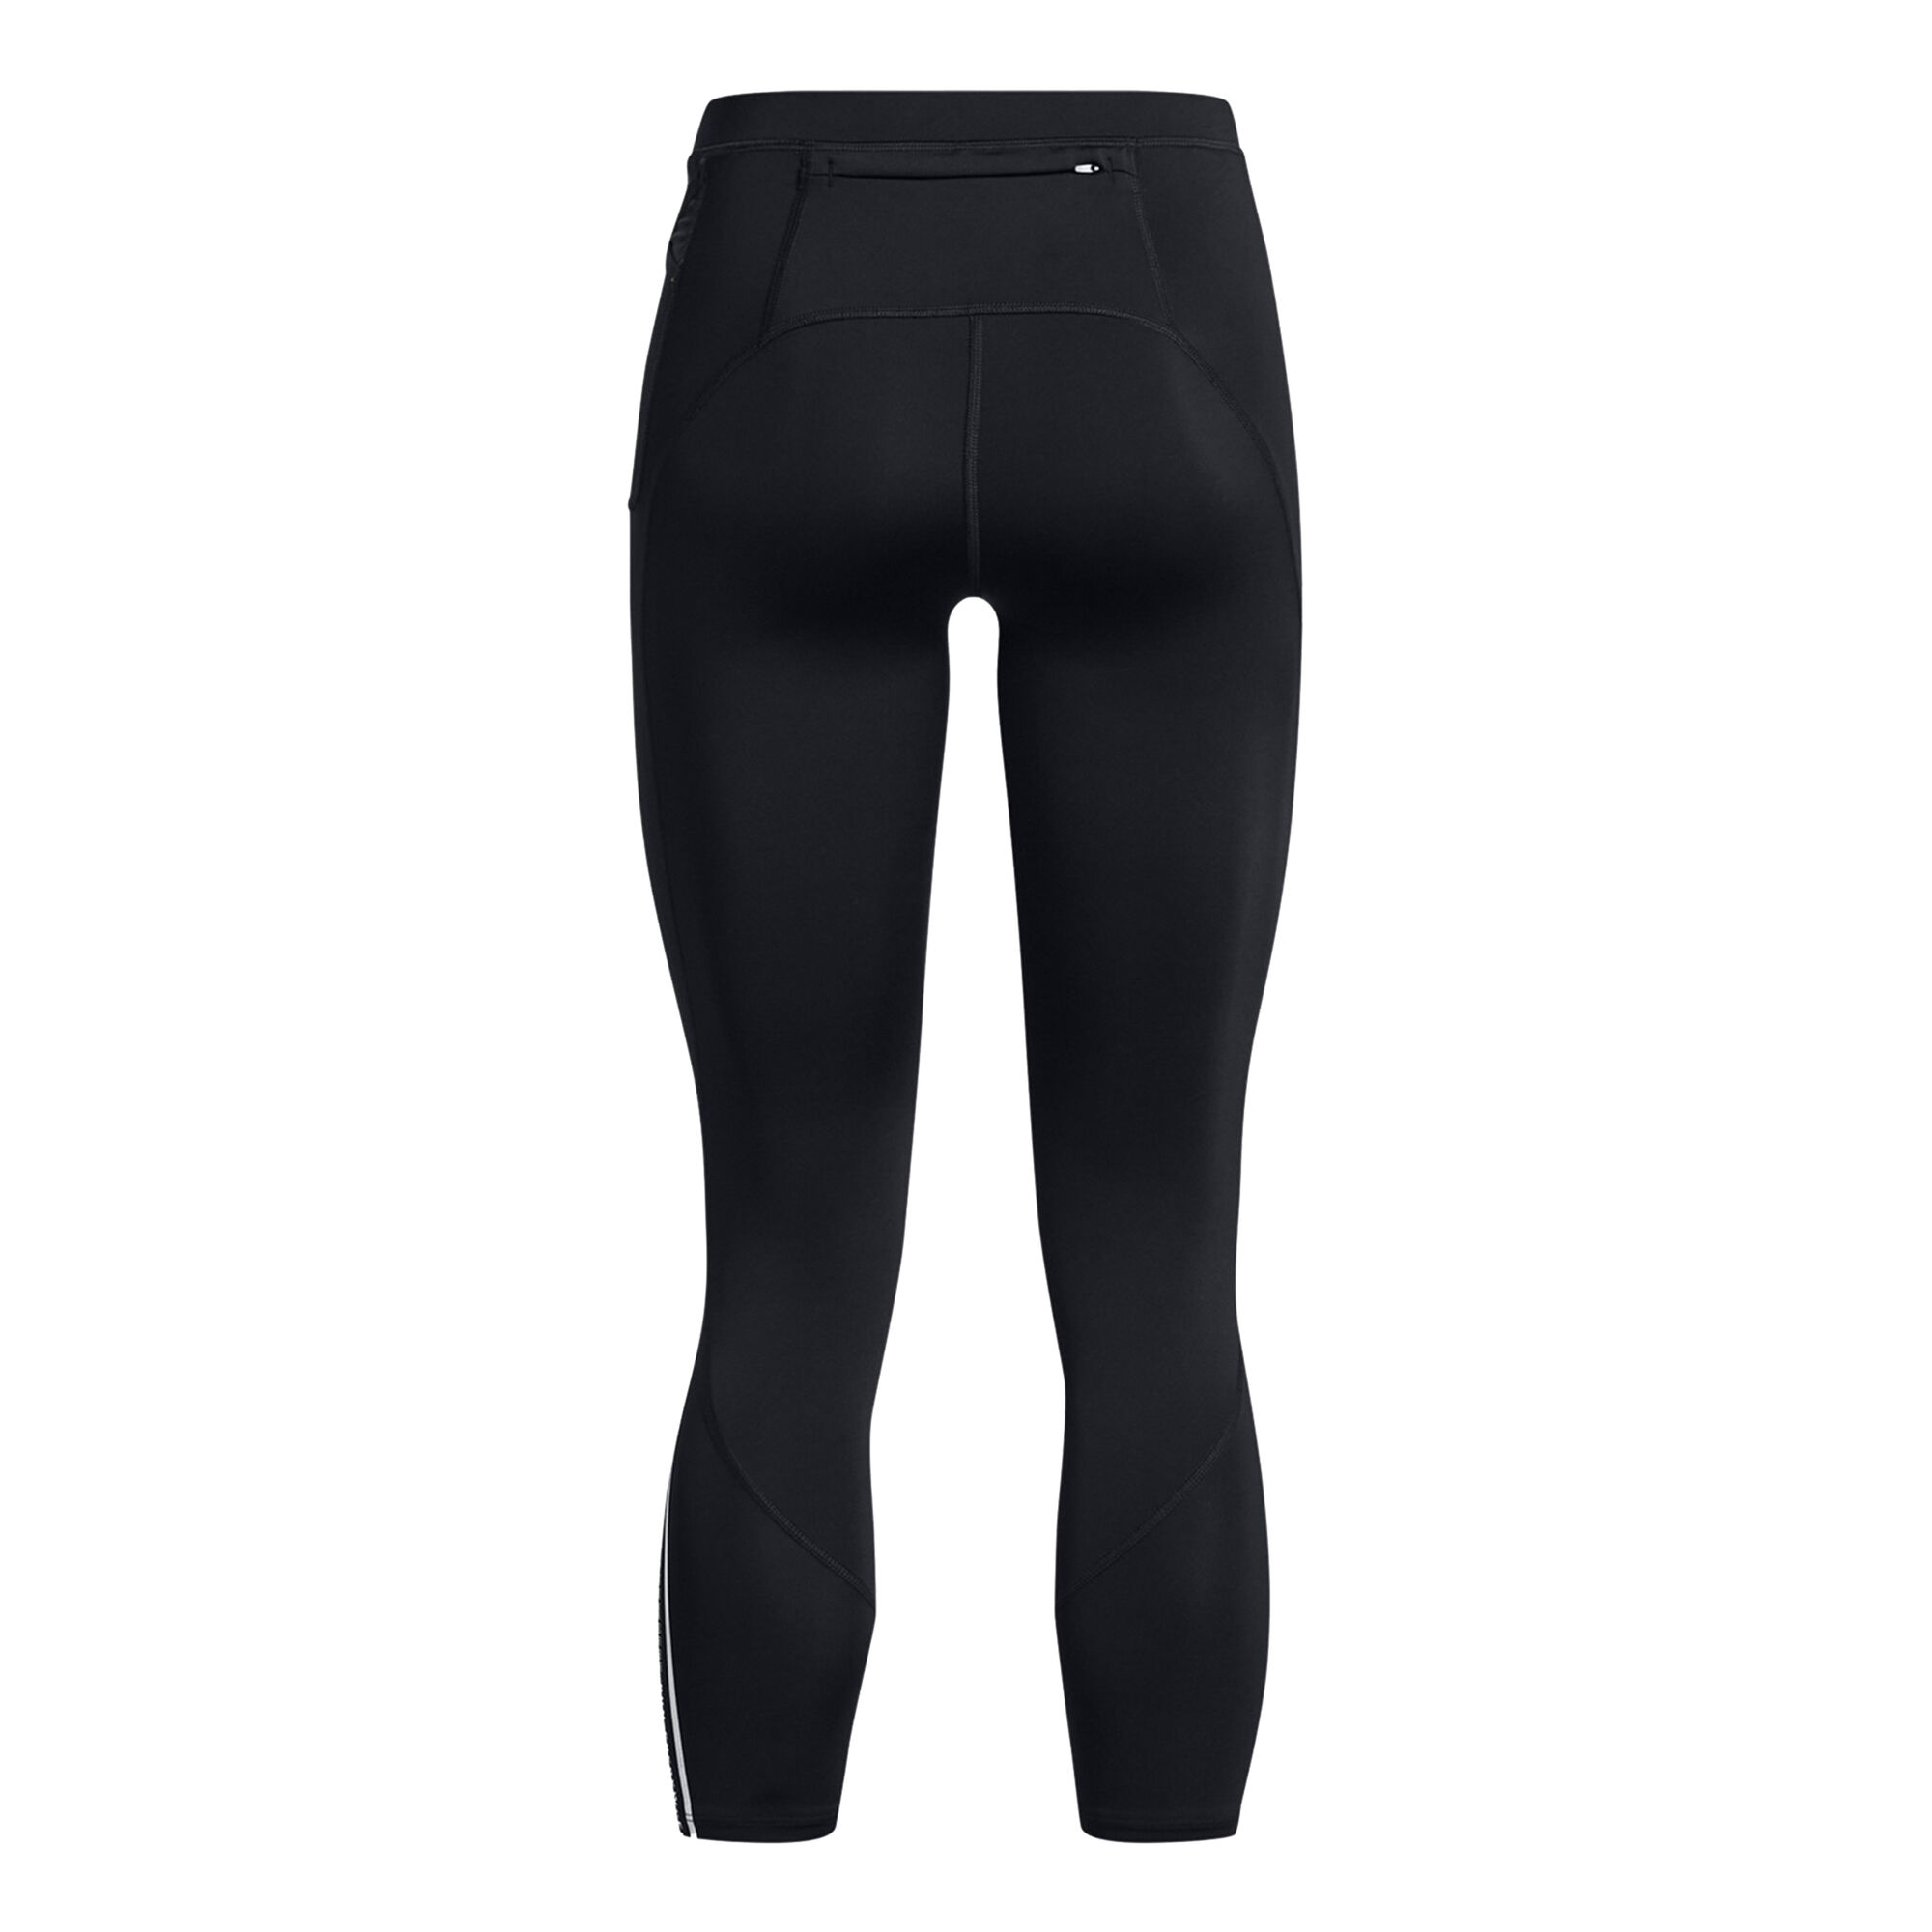 Momentum Agile Womens Breathable & Sweat Wicking Running Tights Charcoal  Marl/Black - Clothing from Northern Runner UK